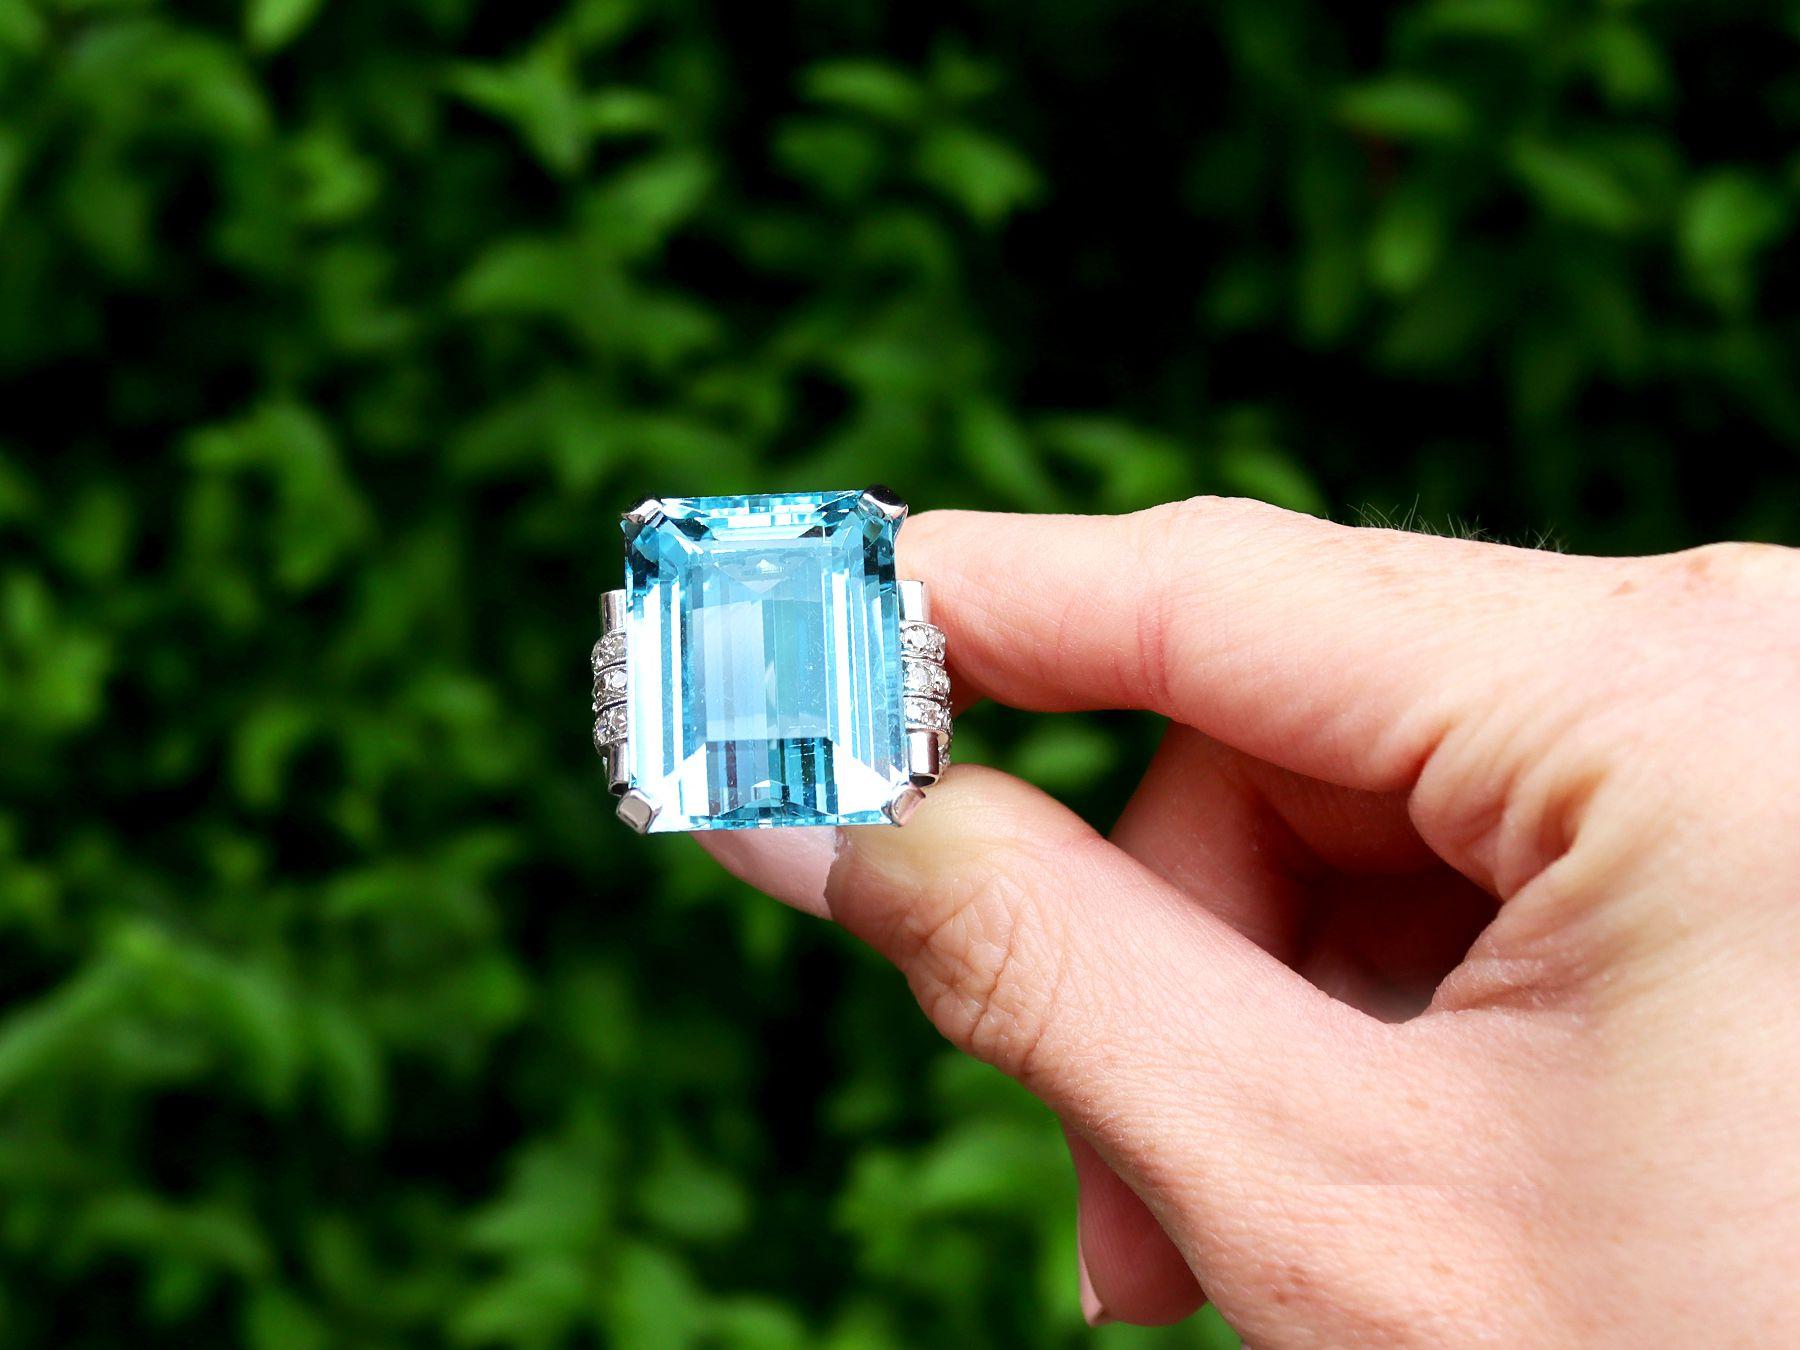 A stunning and large Art Deco 34.22 carat aquamarine and 1.28 carat diamond, 15 karat white gold and platinum set cocktail ring; part of our diverse vintage jewellery collections

This stunning, fine and impressive vintage aquamarine and diamond